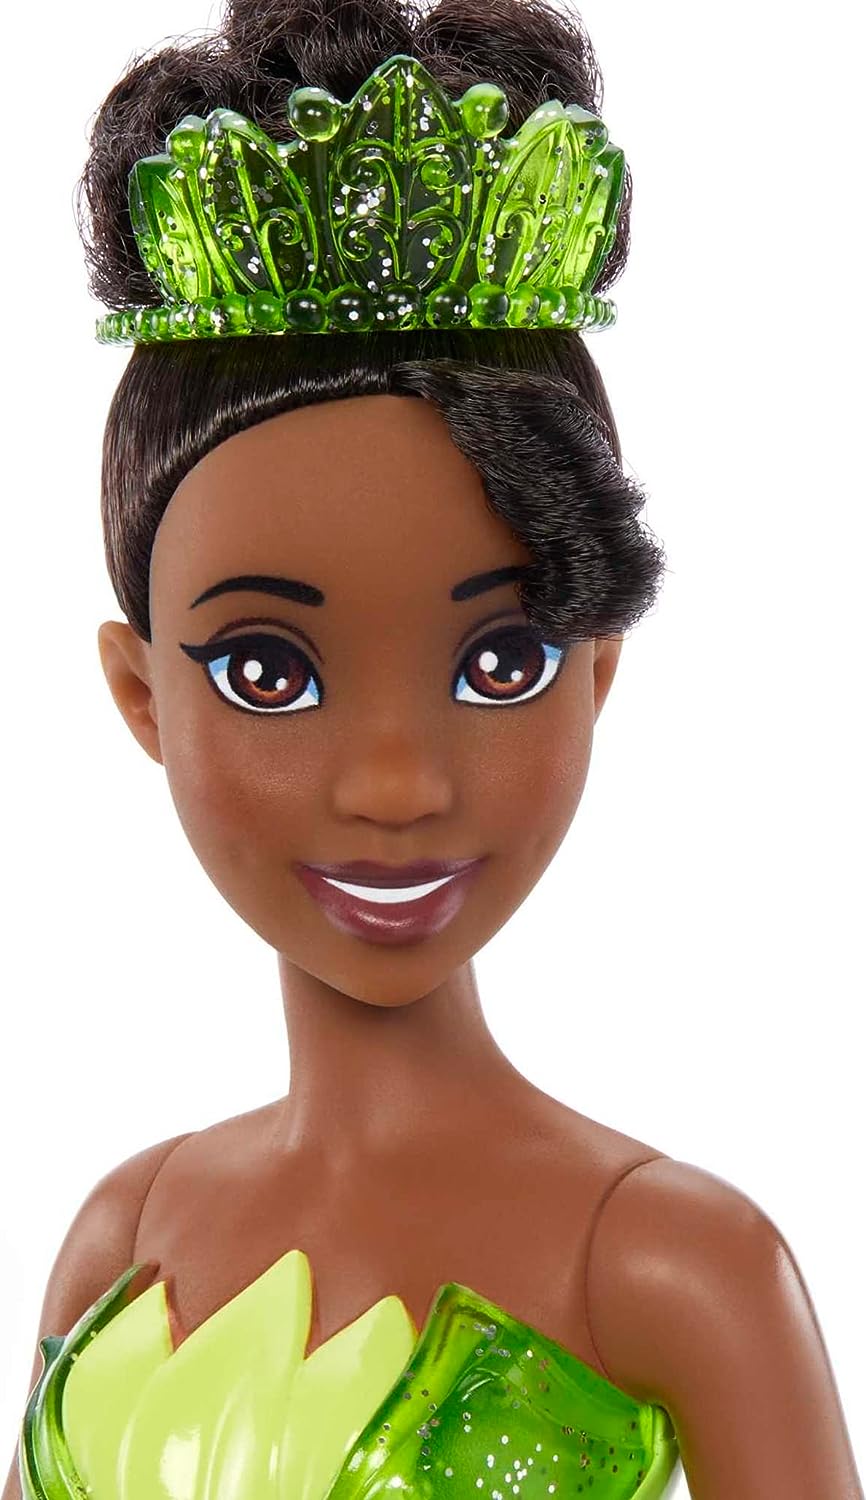 Disney Princess Toys, Tiana Posable Fashion Doll with Sparkling Clothing and Accessories